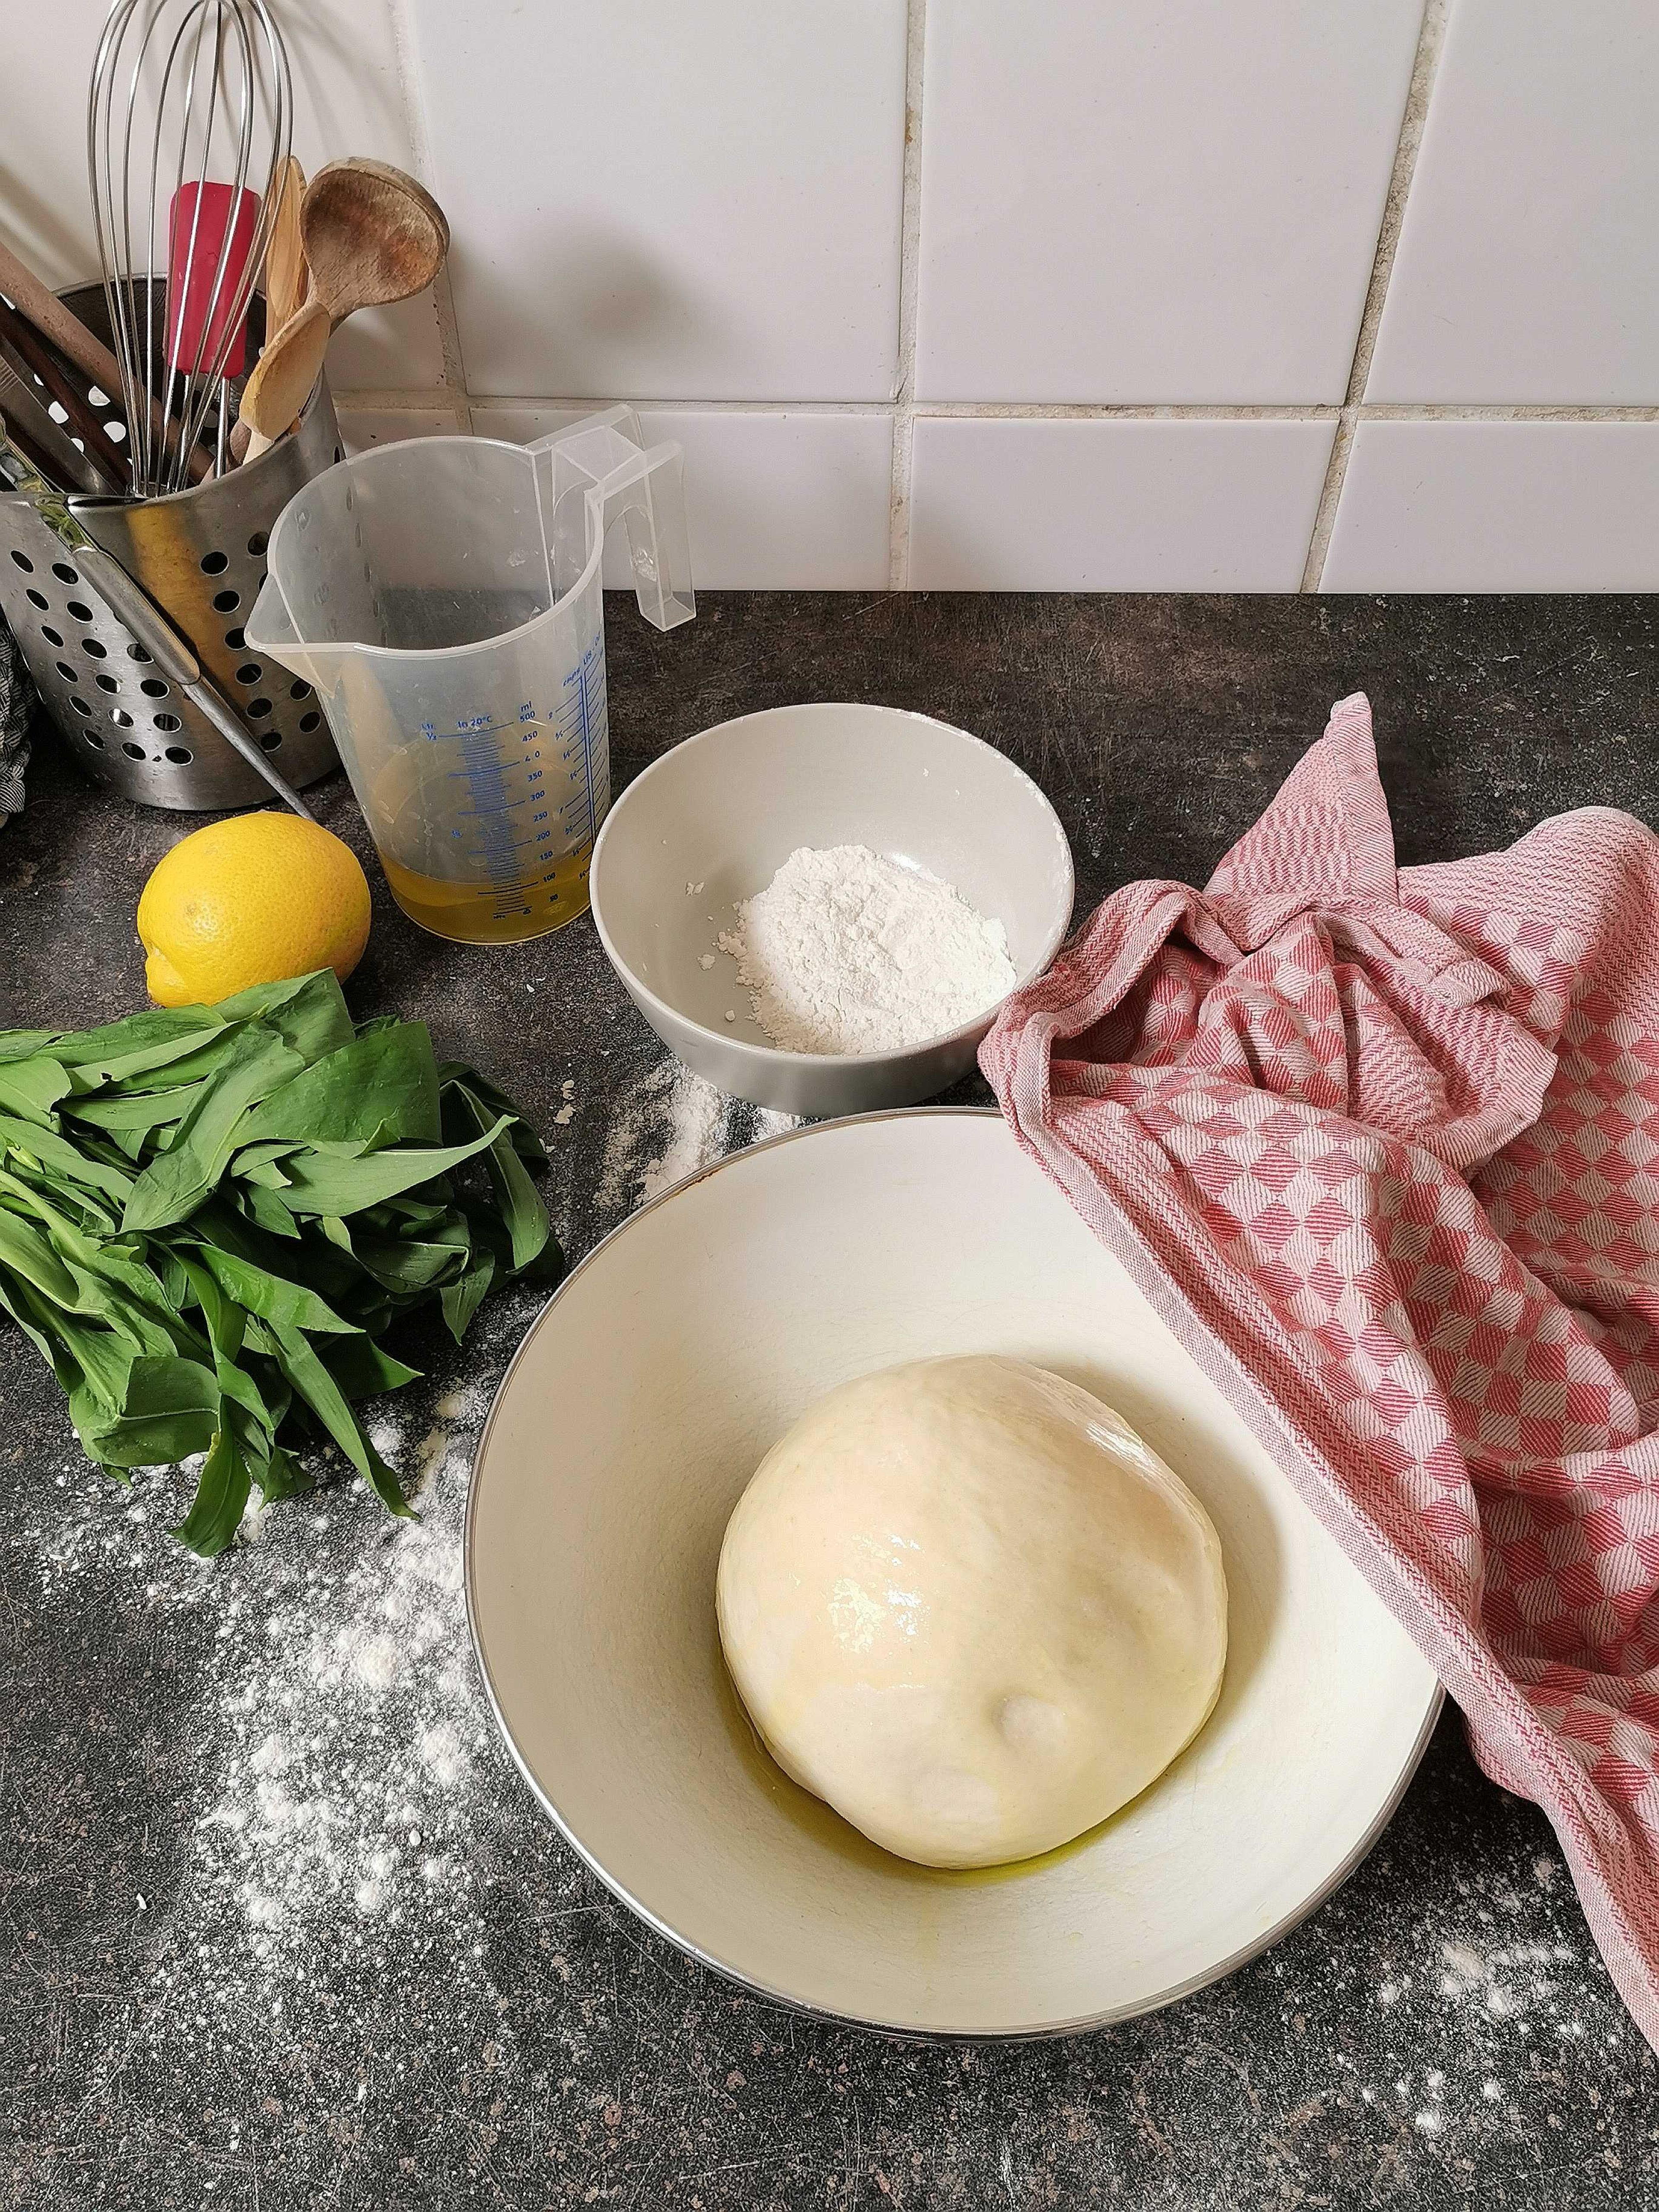 Transfer dough to a floured work surface and knead it with your hands until it's smooth and elastic. Grease a large bowl with olive oil, add the dough, cover with a damp kitchen towel, and let rise in a warm place for approx. 1 hr.